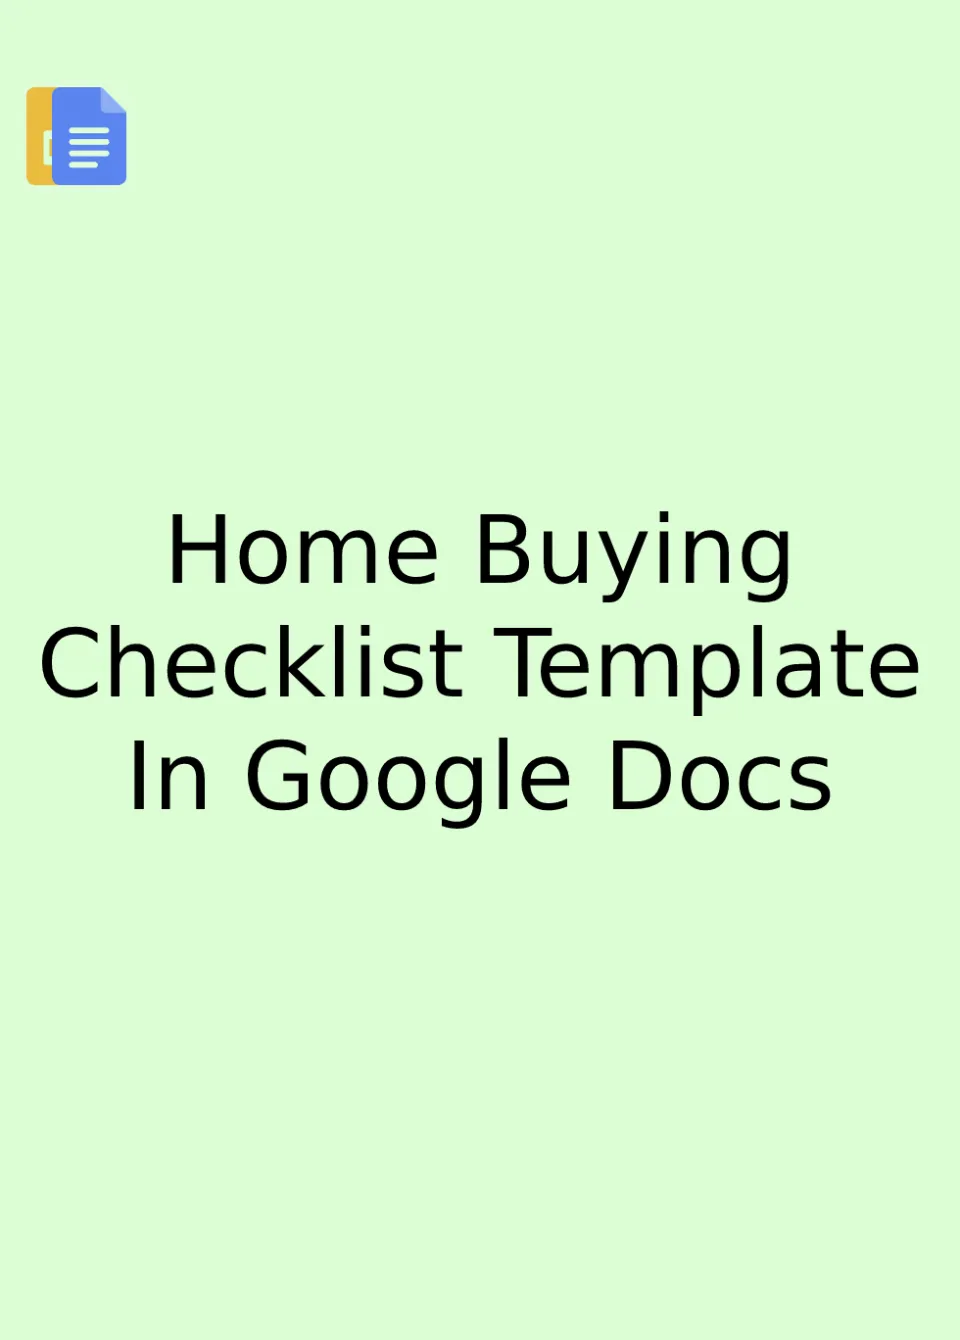 Home Buying Checklist Template Google Docs